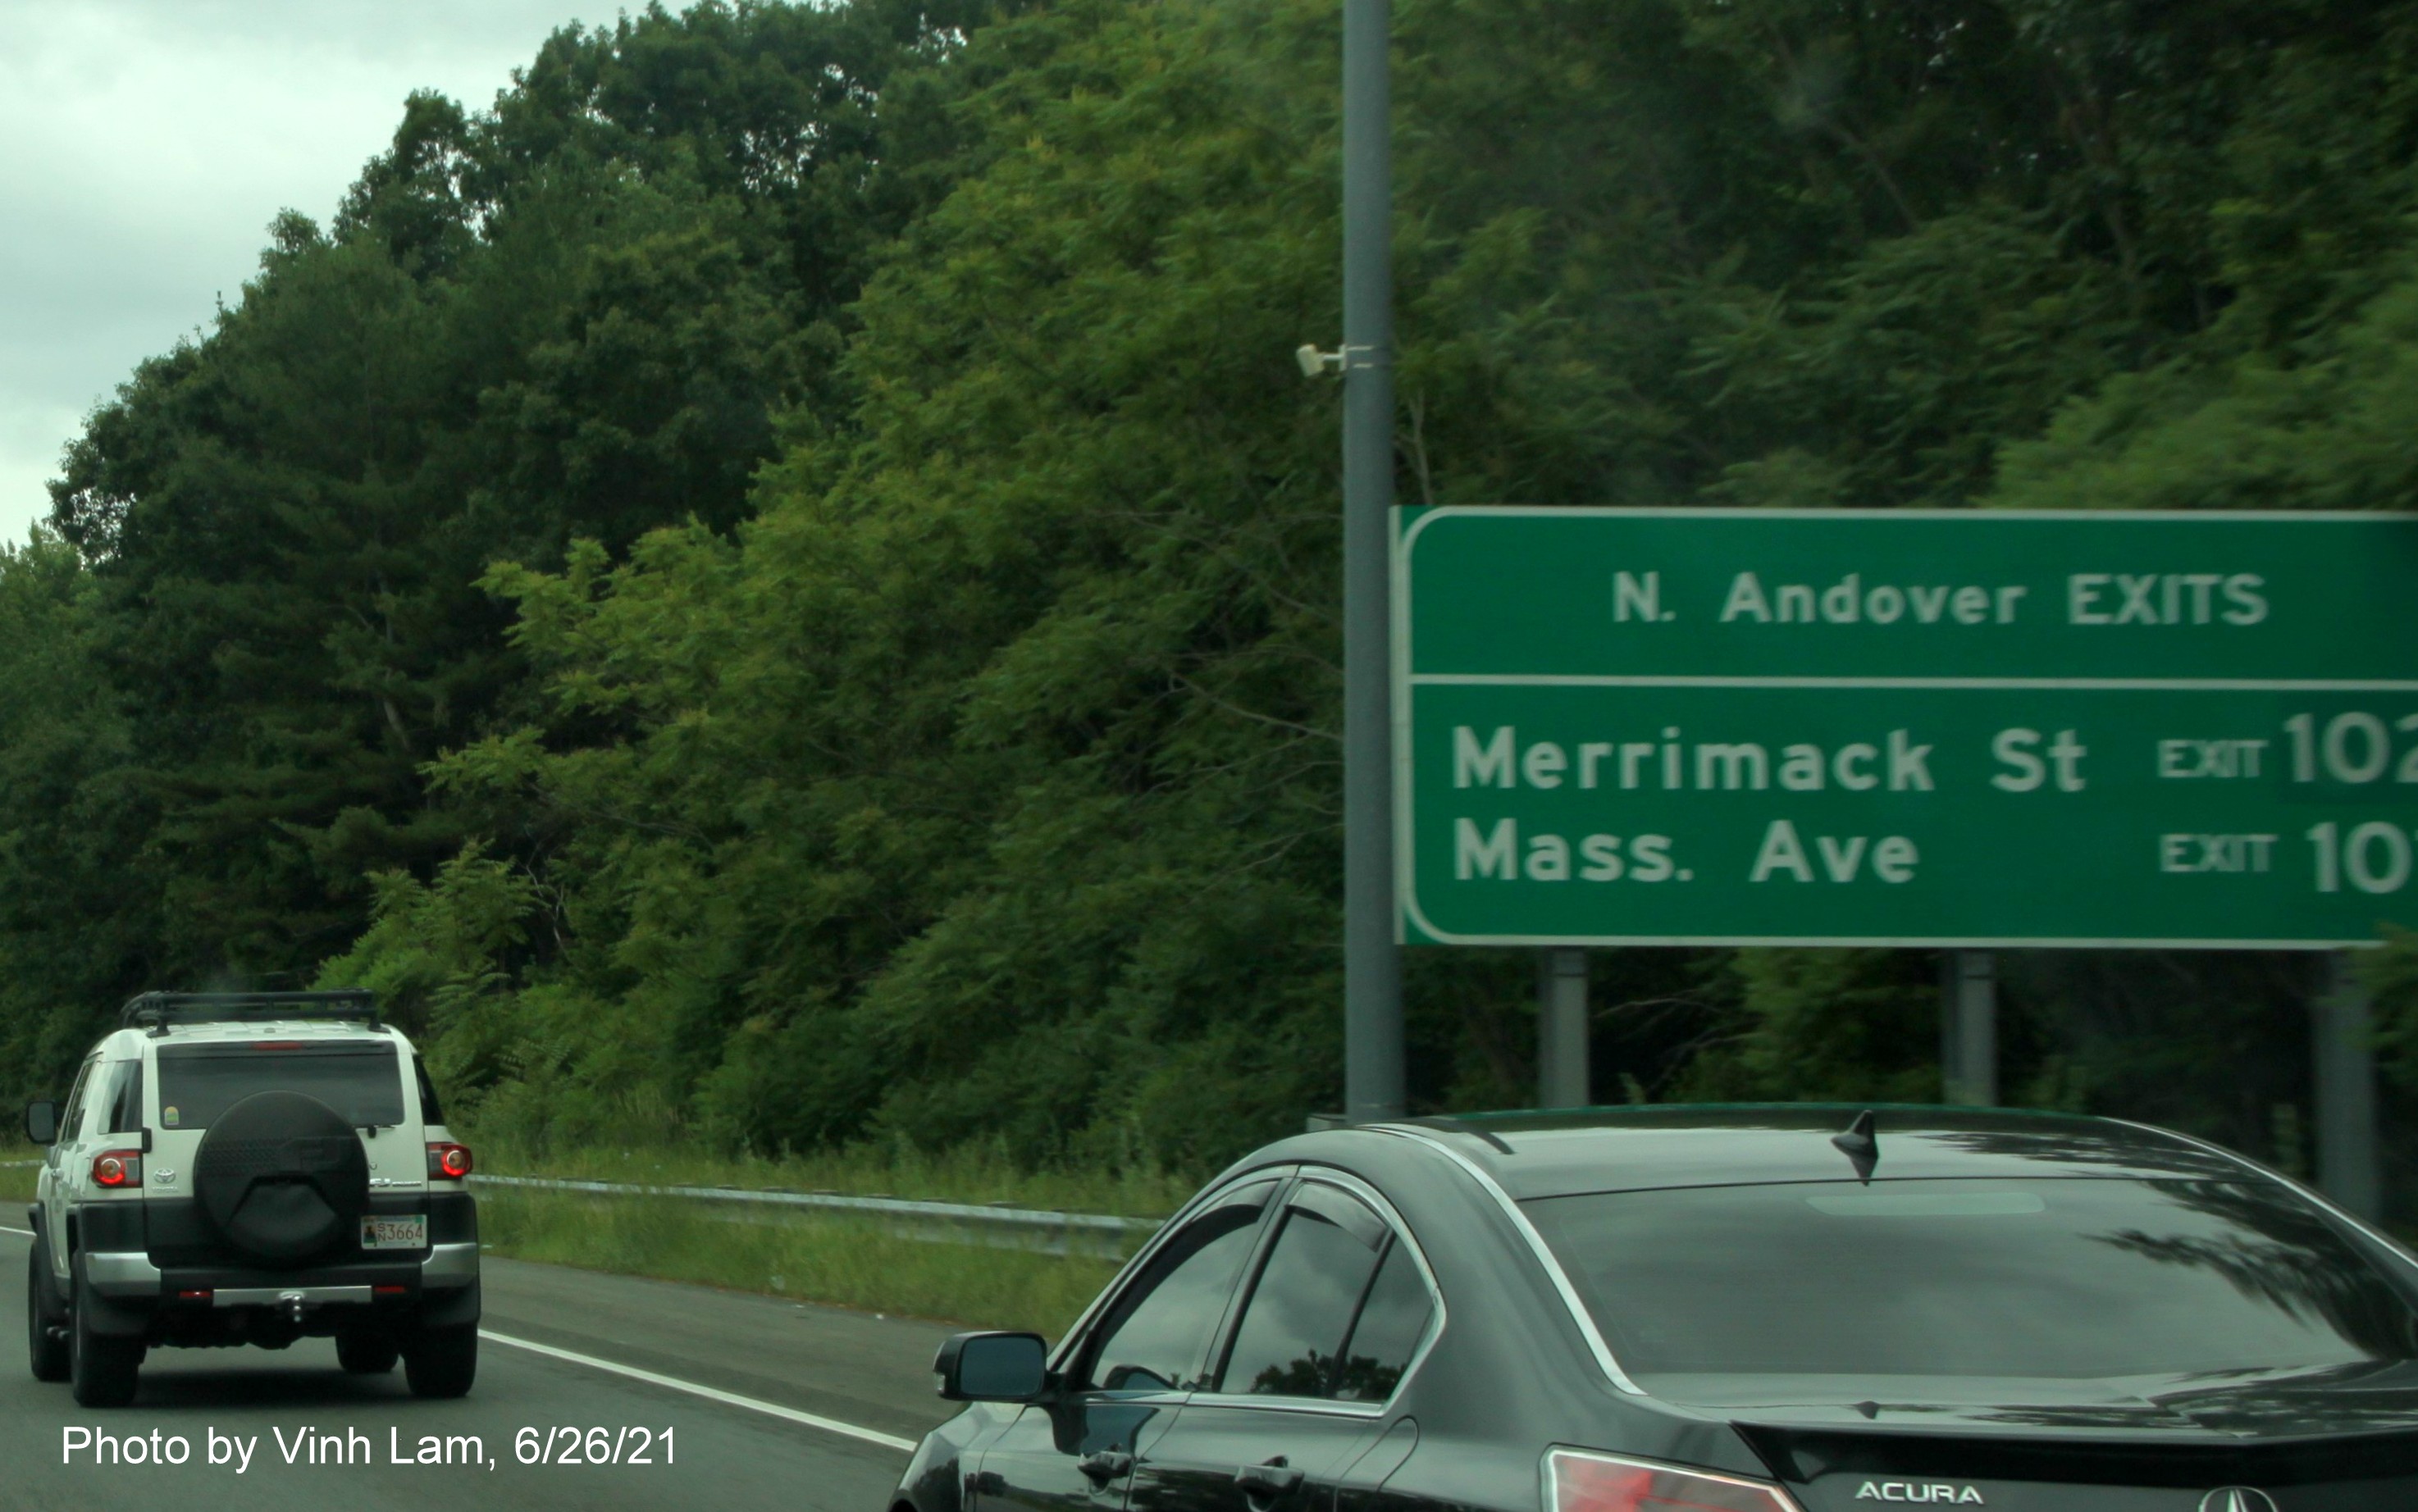 Image of auxiliary sign for North Andover exits with new milepost based exit numbers on I-495 South in Lawrence, photo by Vinh Lam, June 2021